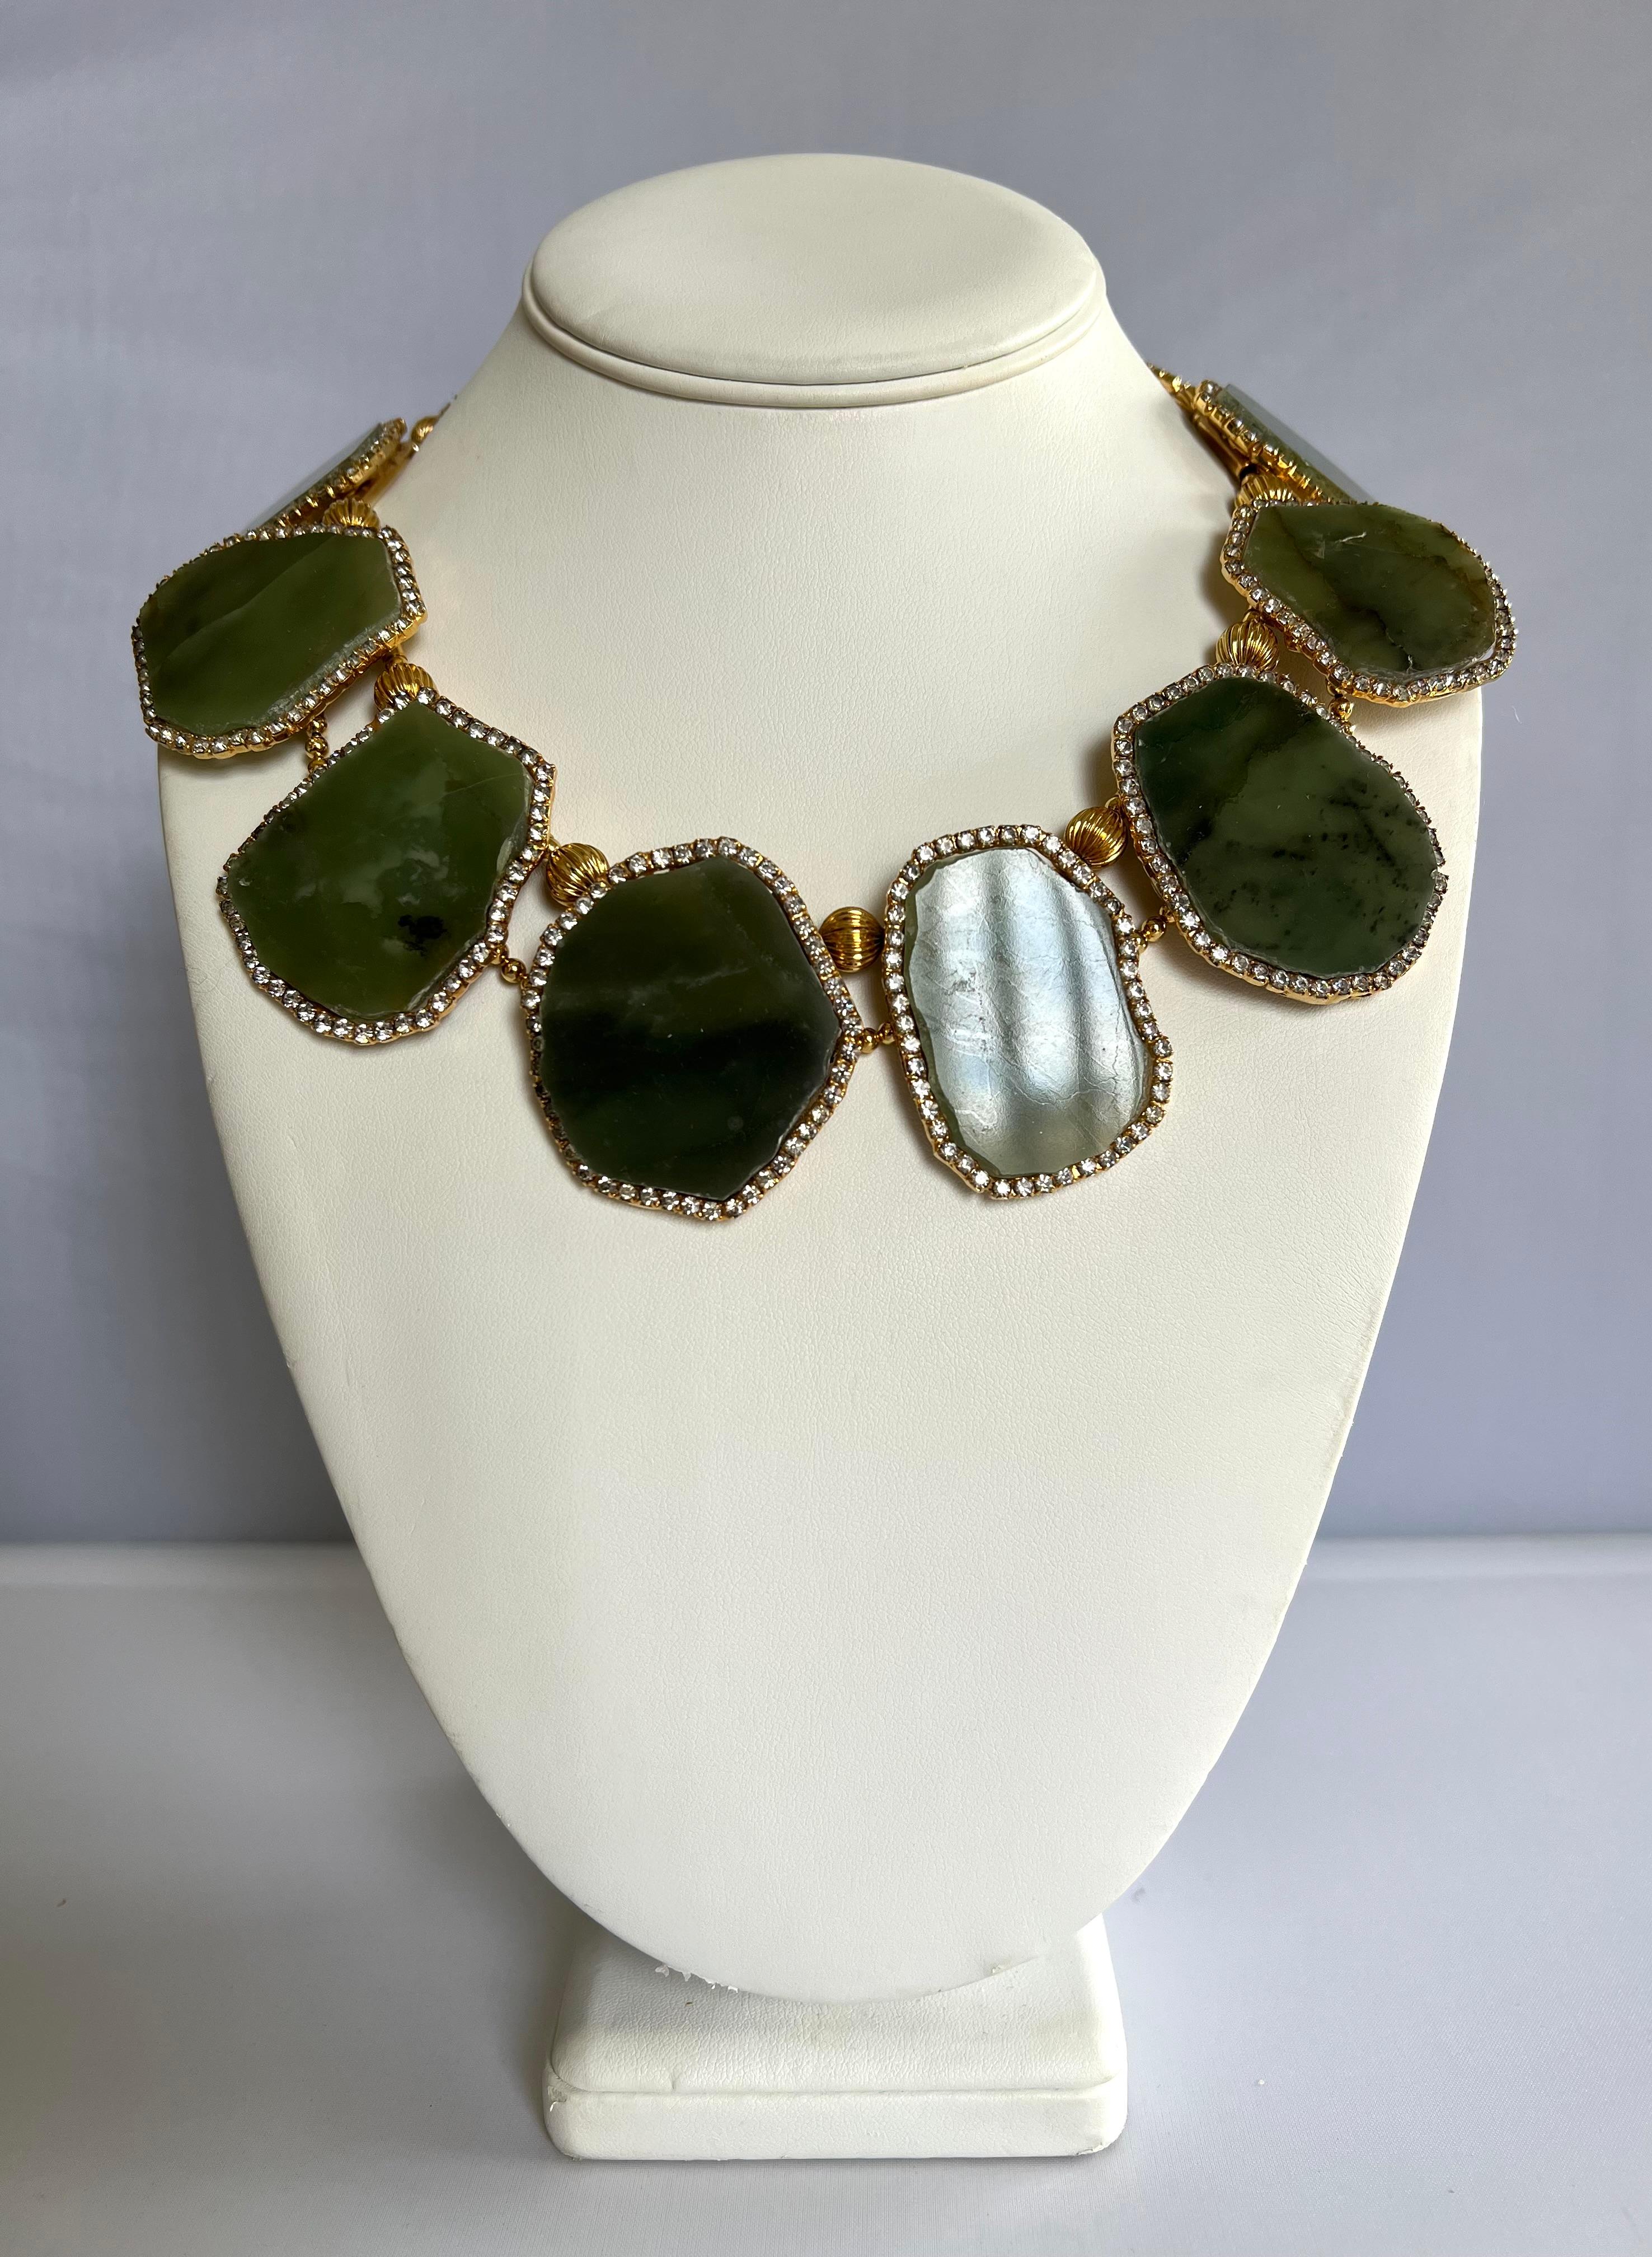 Scarce William de Lillo hand-constructed jeweled necklace with genuine polished agate, William de Lillo for William de Lillo Ltd New York, circa 1974. 